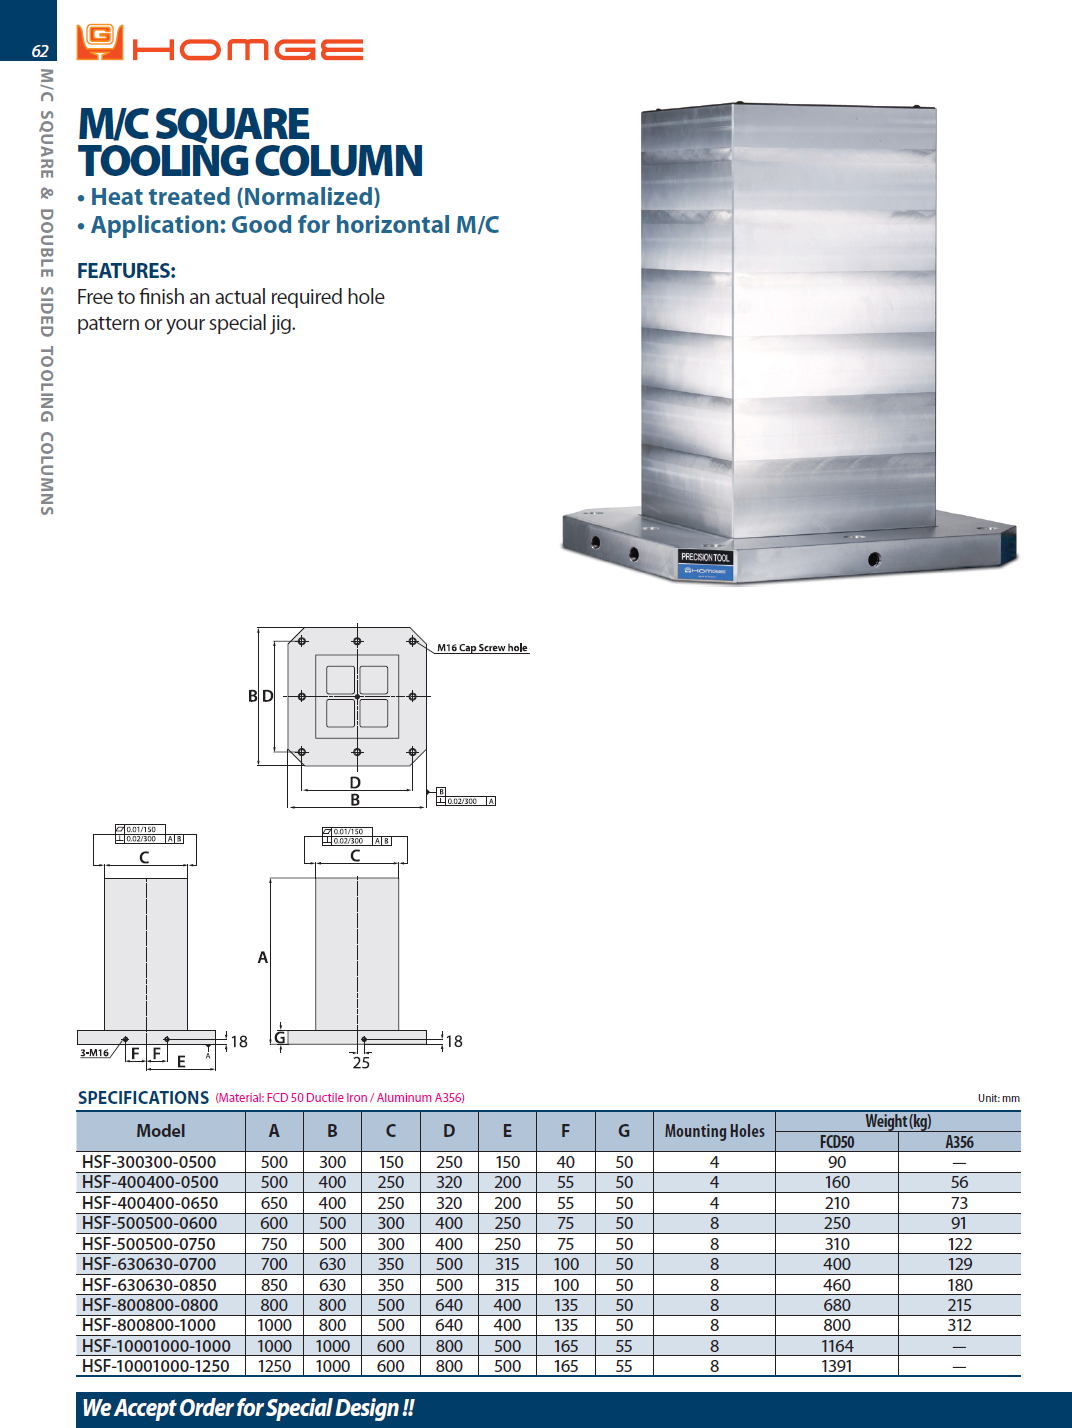 Catalog|M/C SQUARE TOOLING COLUMN - CNC TOMBSTONE (HSF-)